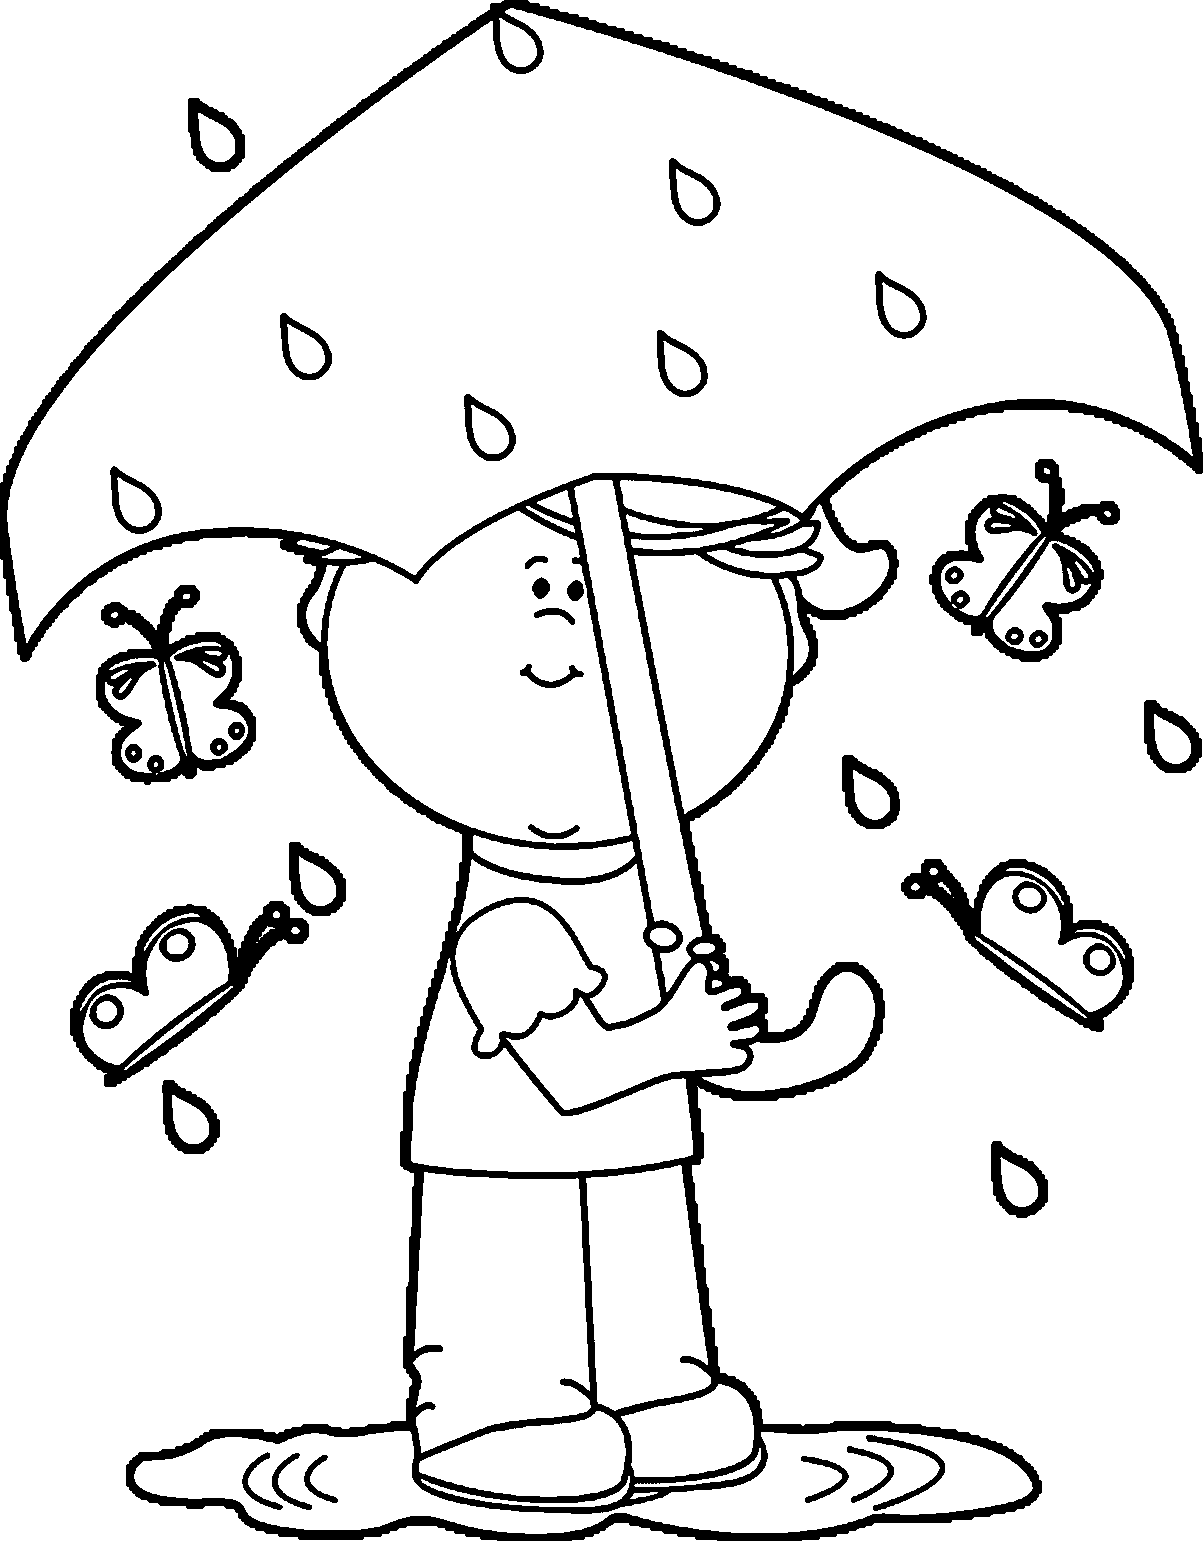 Girl In Spring Rain Coloring Page | Wecoloringpage